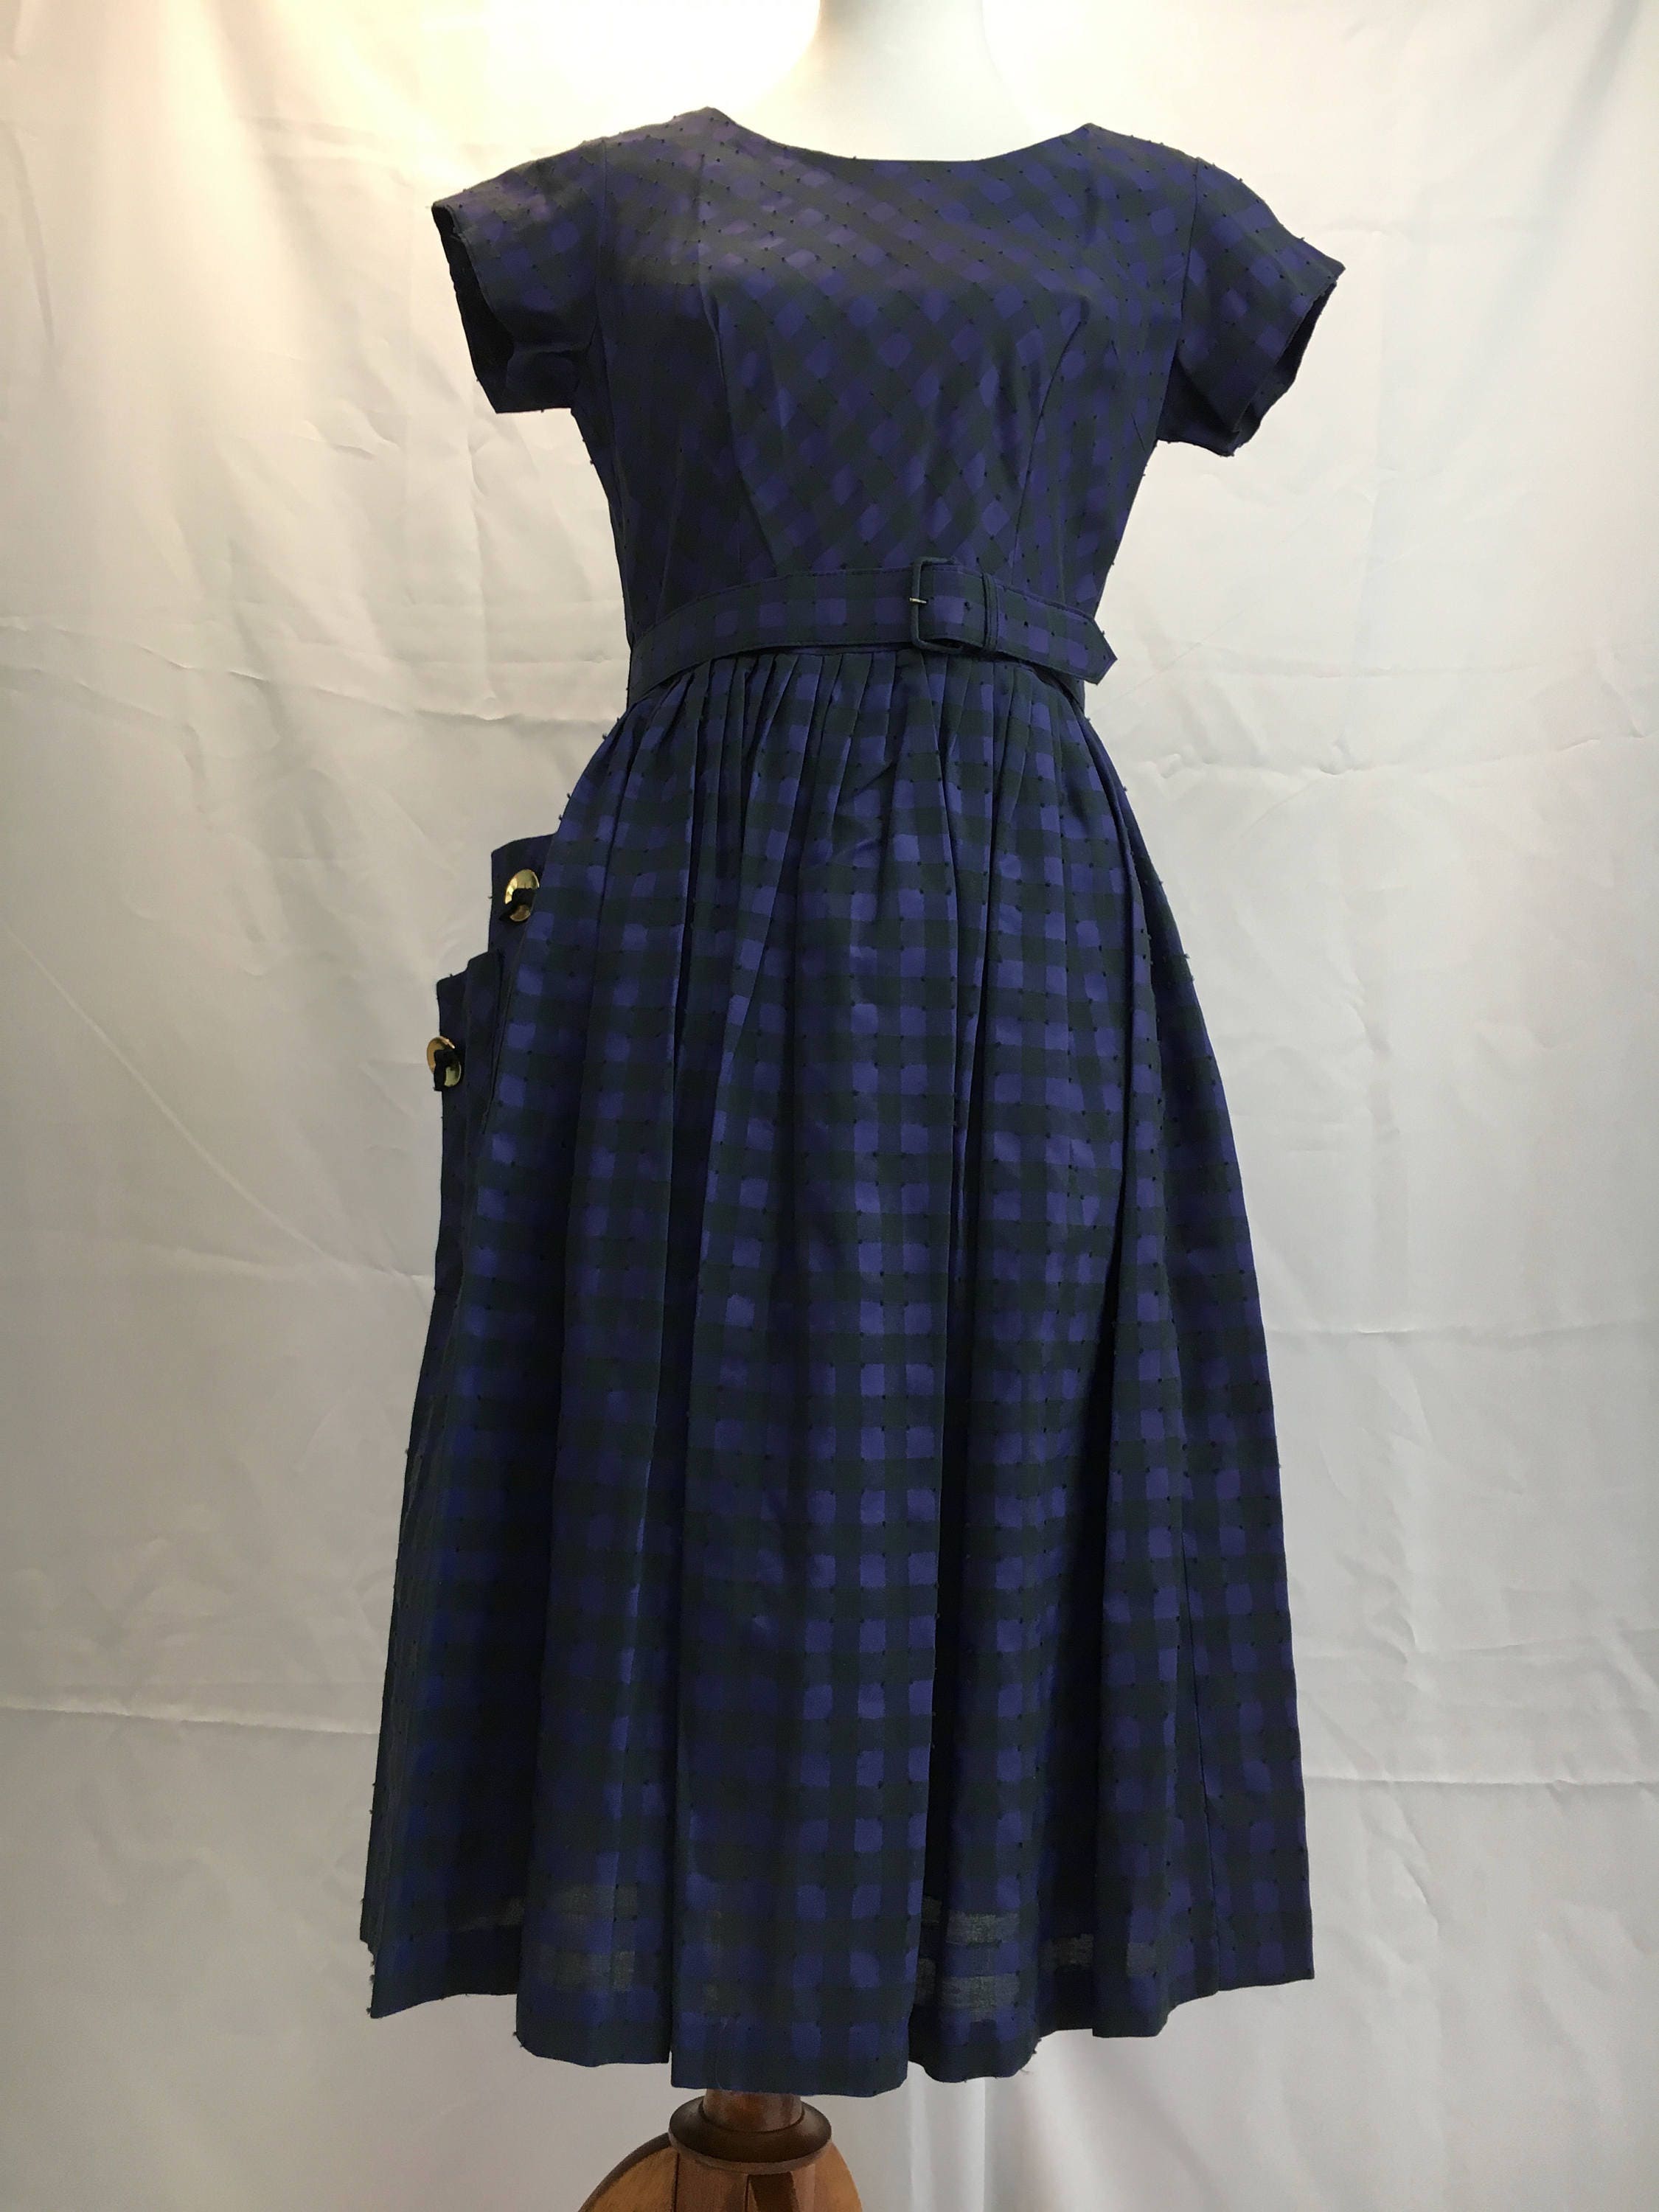 Modern Vintage 50's Dress with Great Button Pockets | Etsy